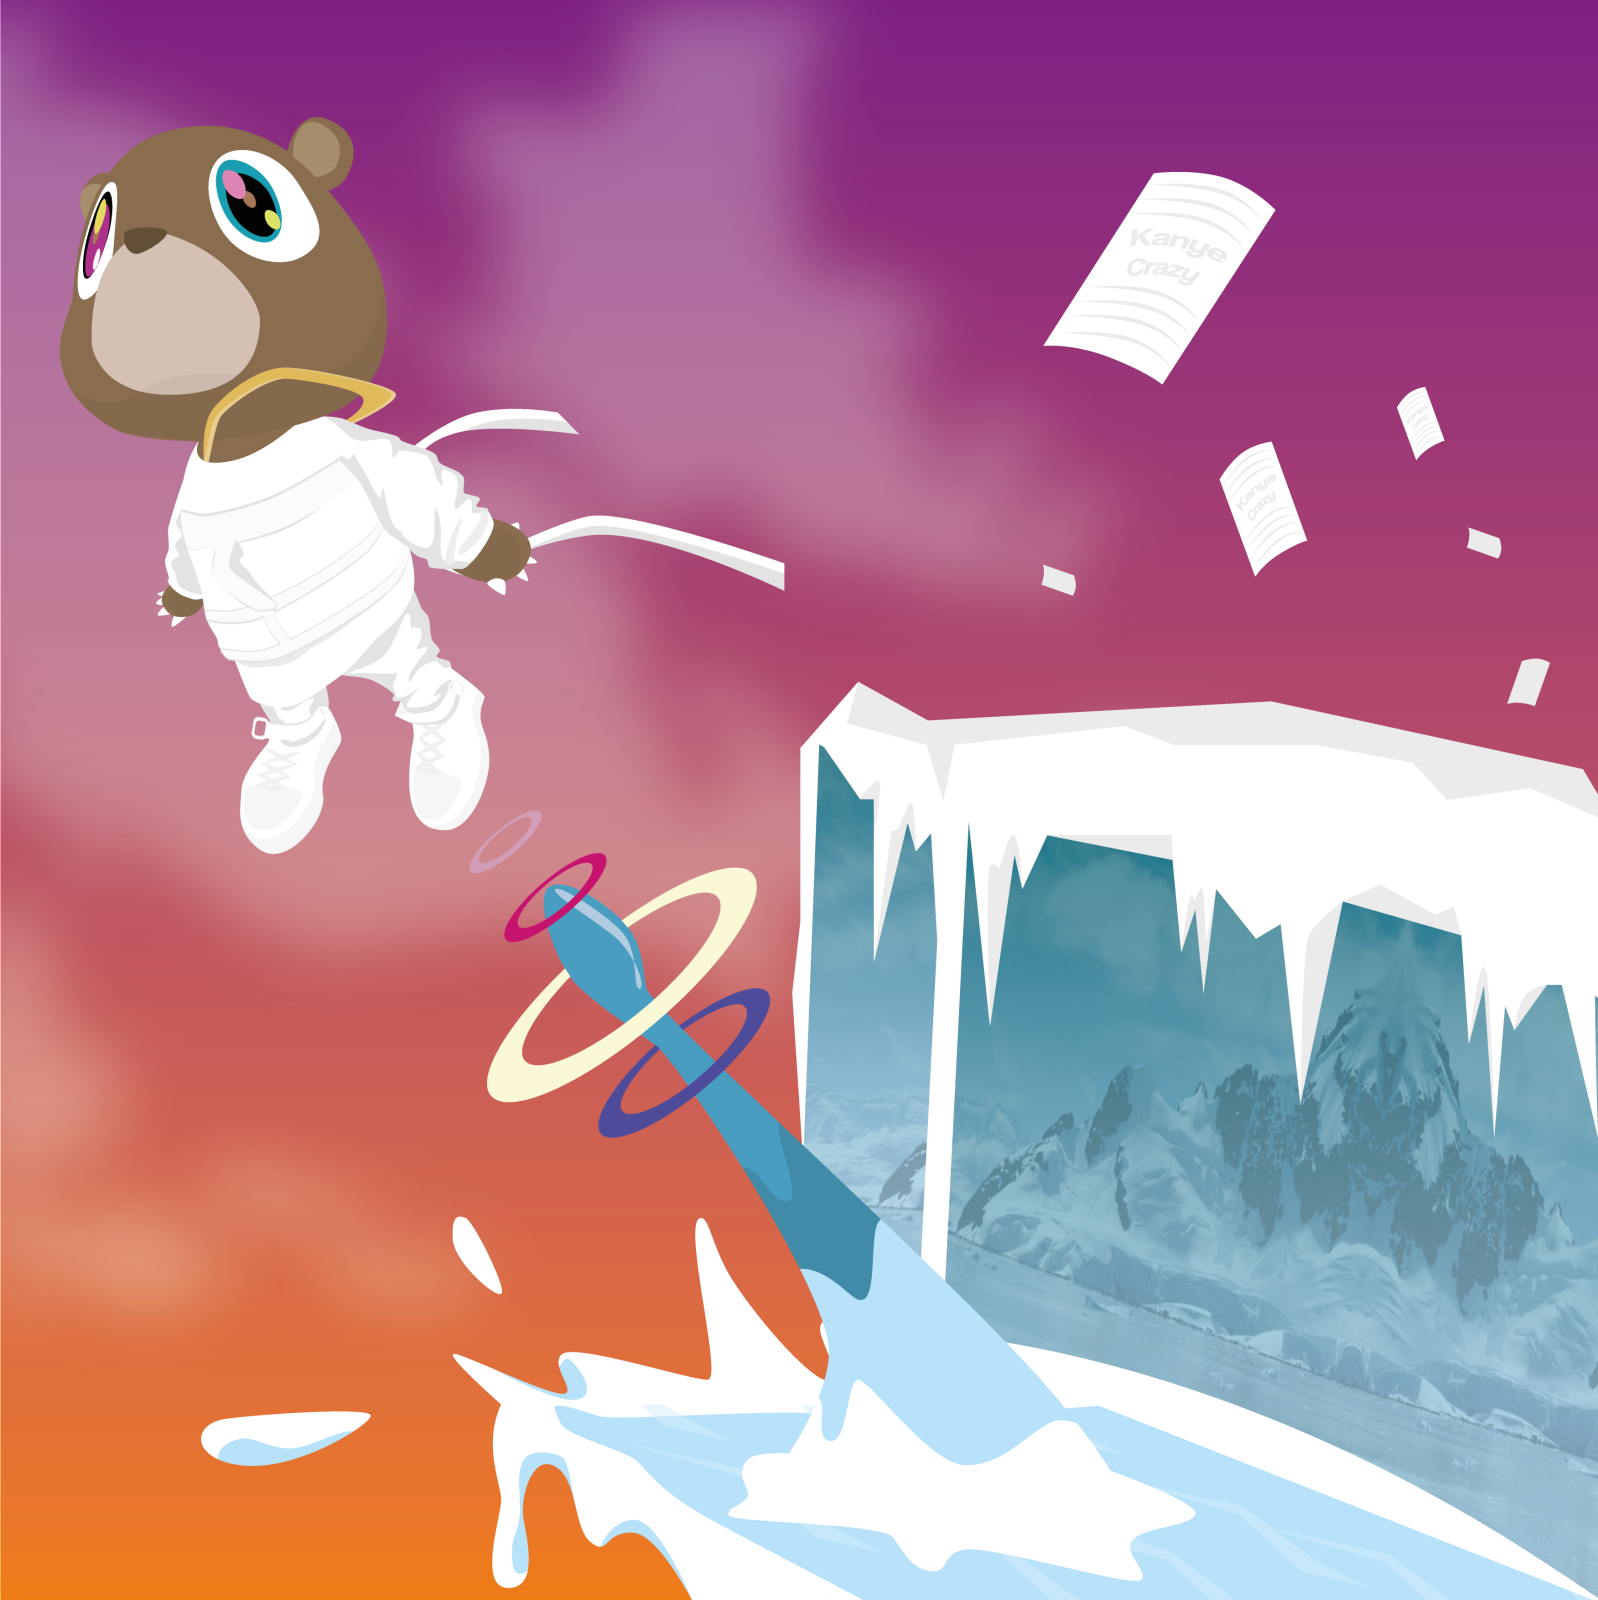 Kanye West Teddy Bear Wallpapers